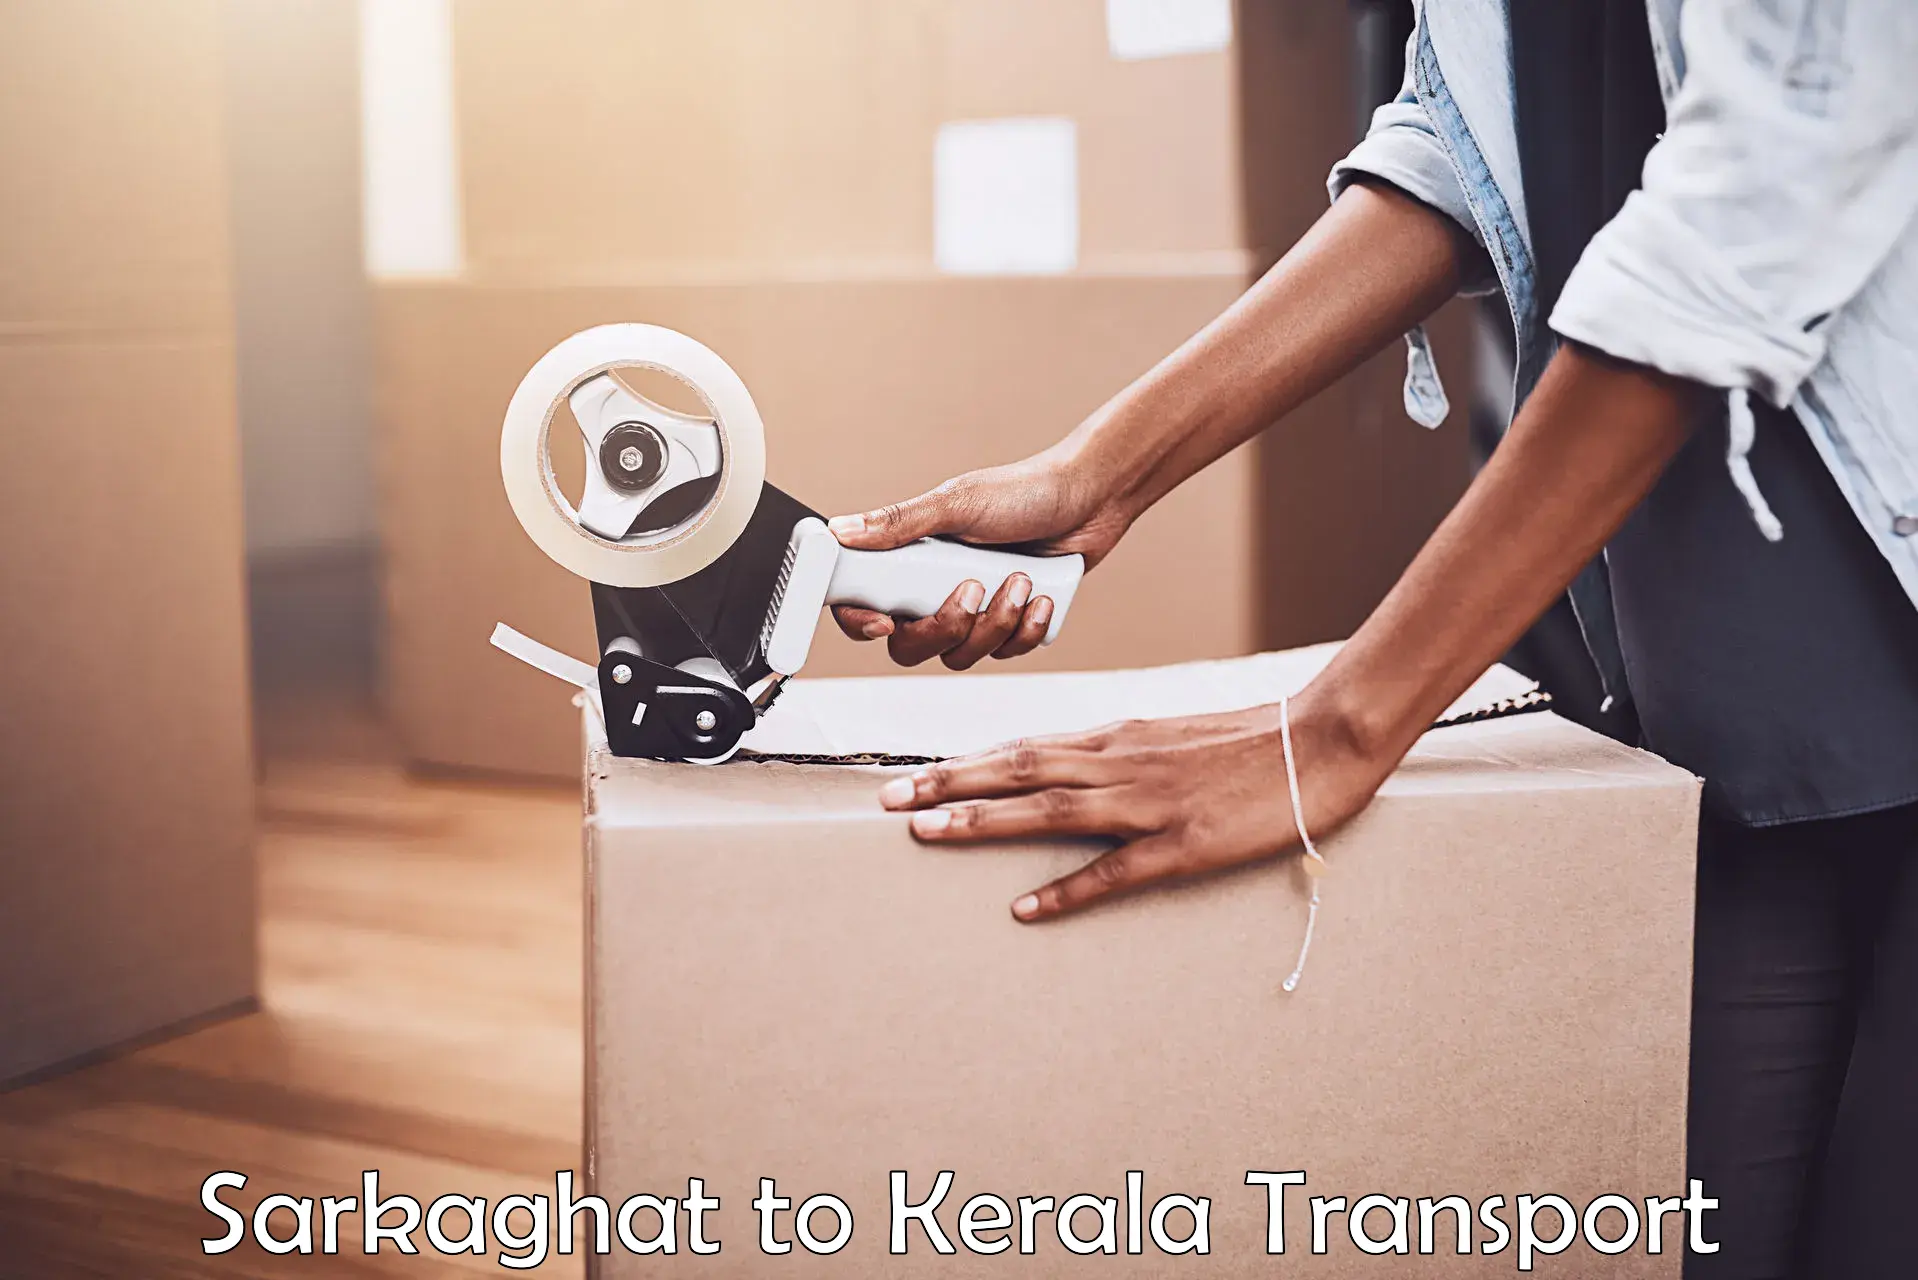 Two wheeler transport services Sarkaghat to Kollam